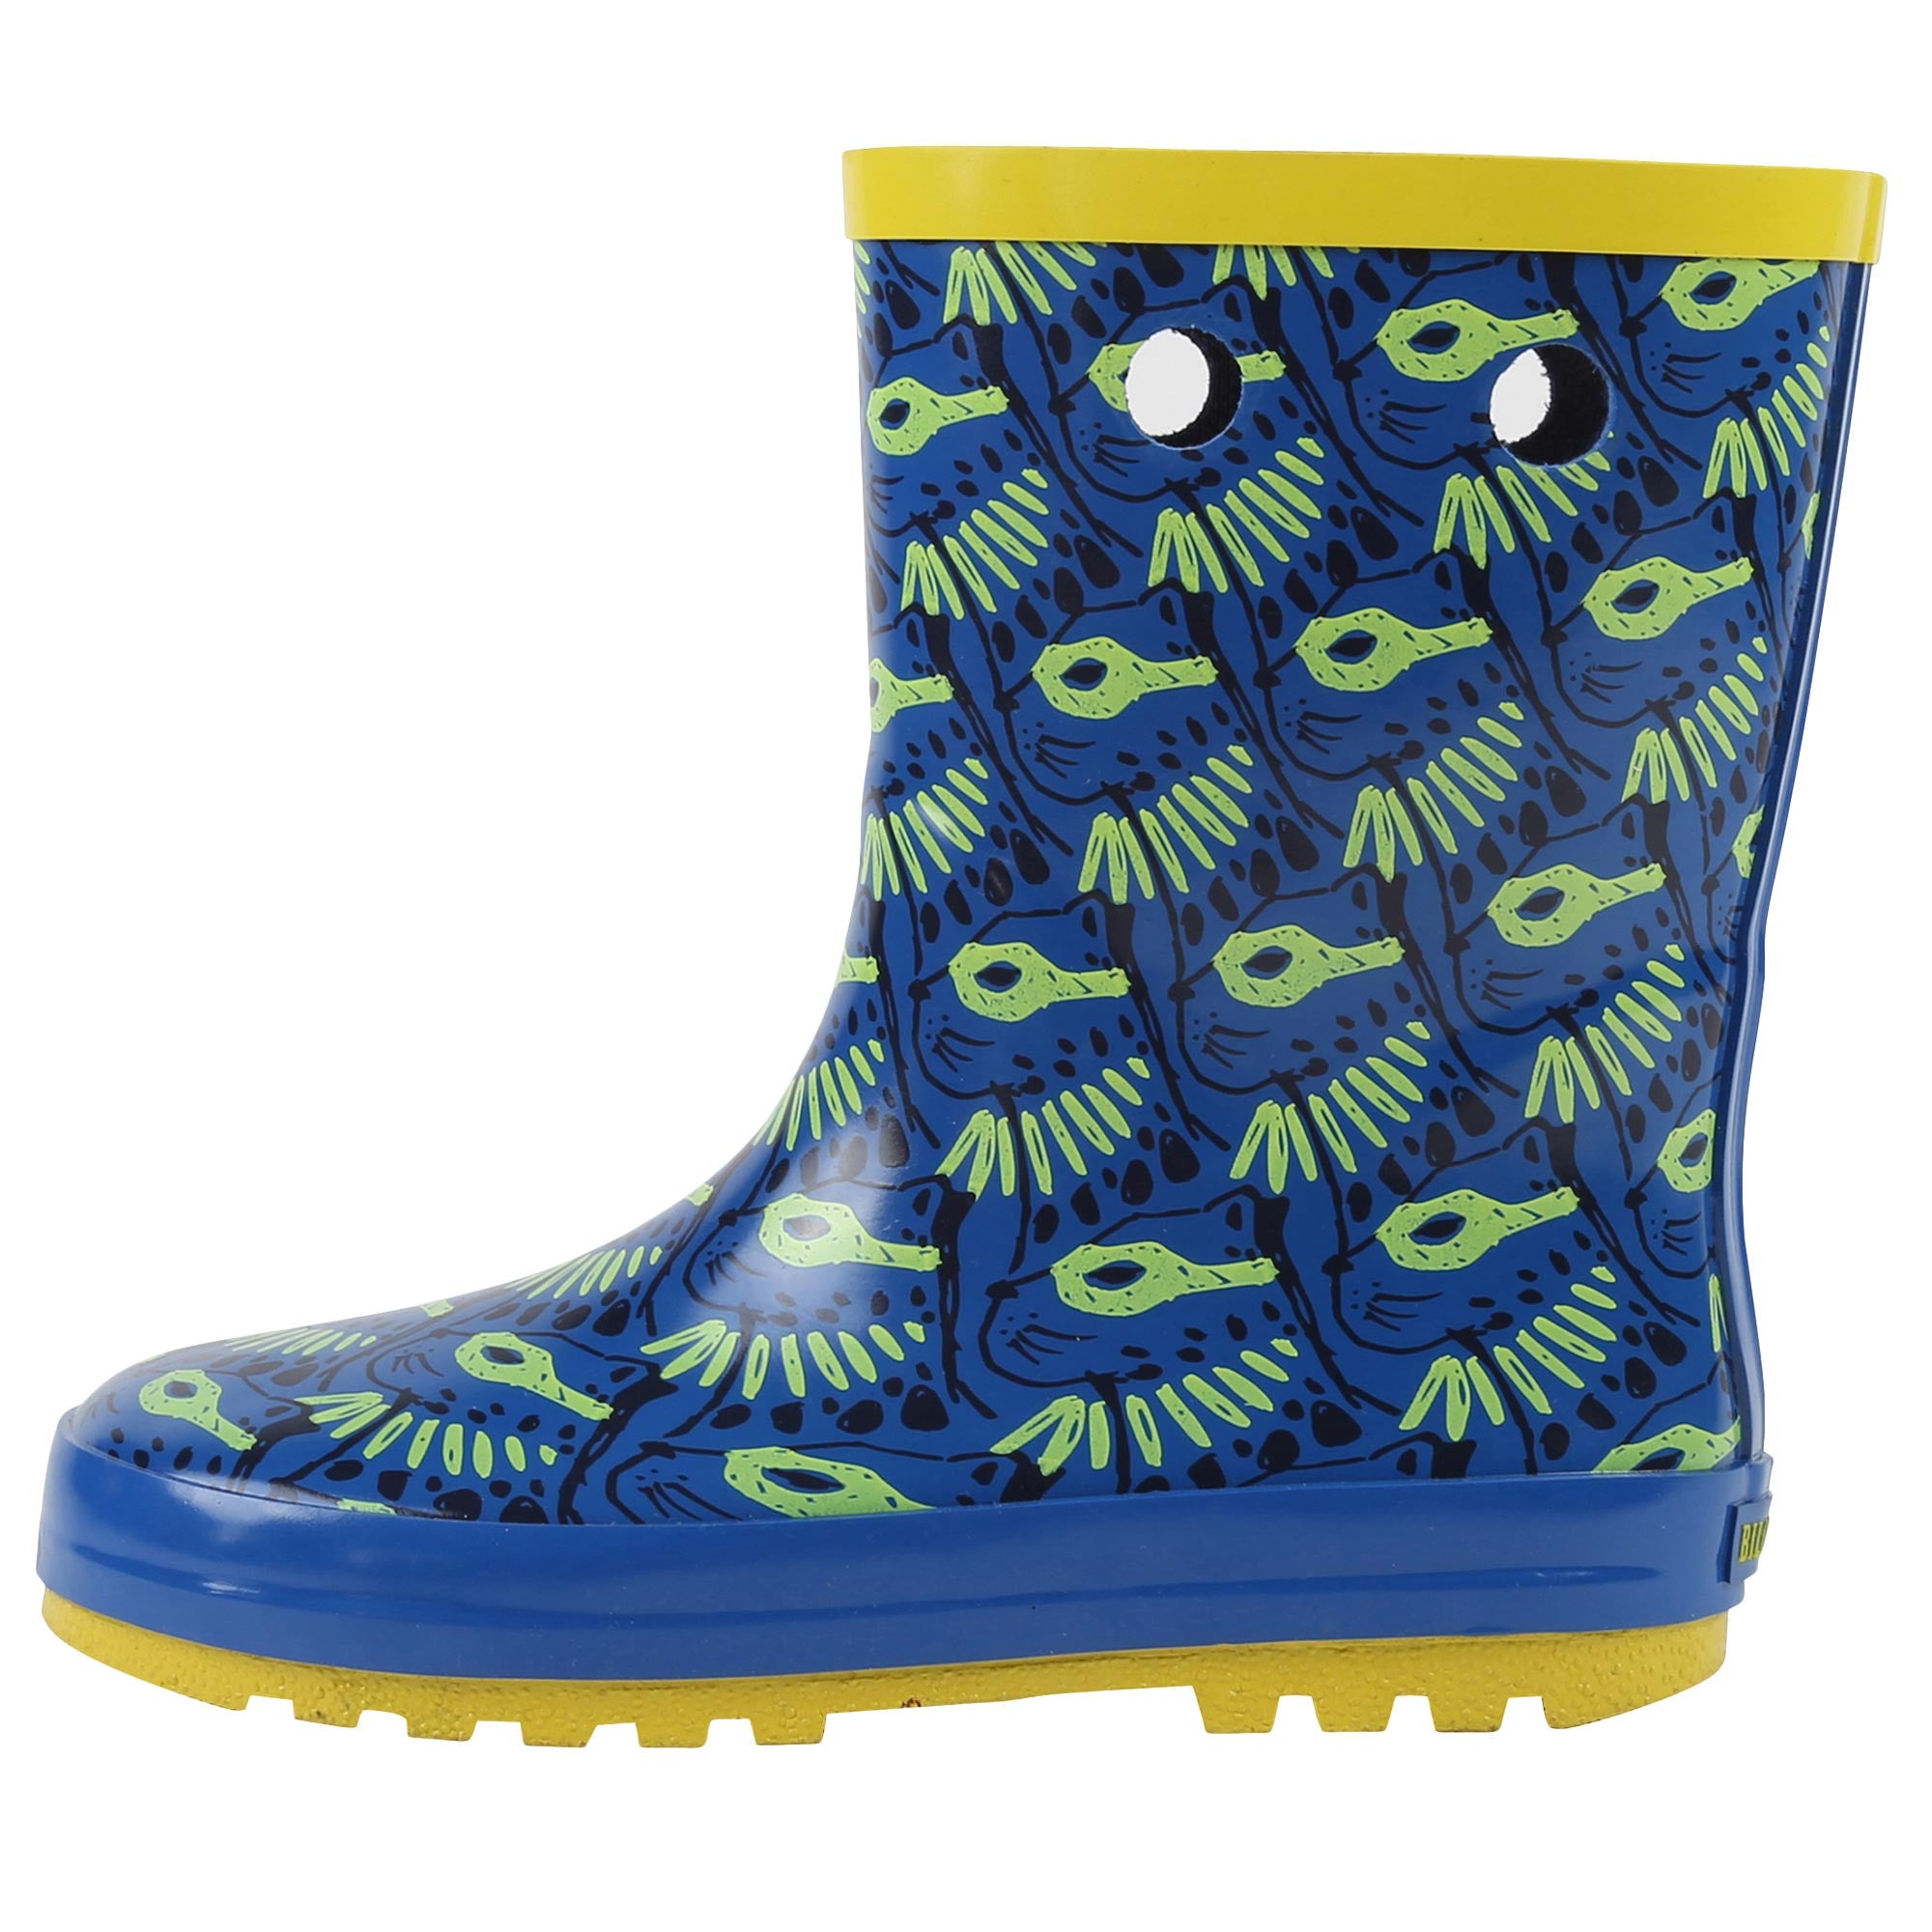 Boys Blue Leopard Rainboots with Yellow Mask